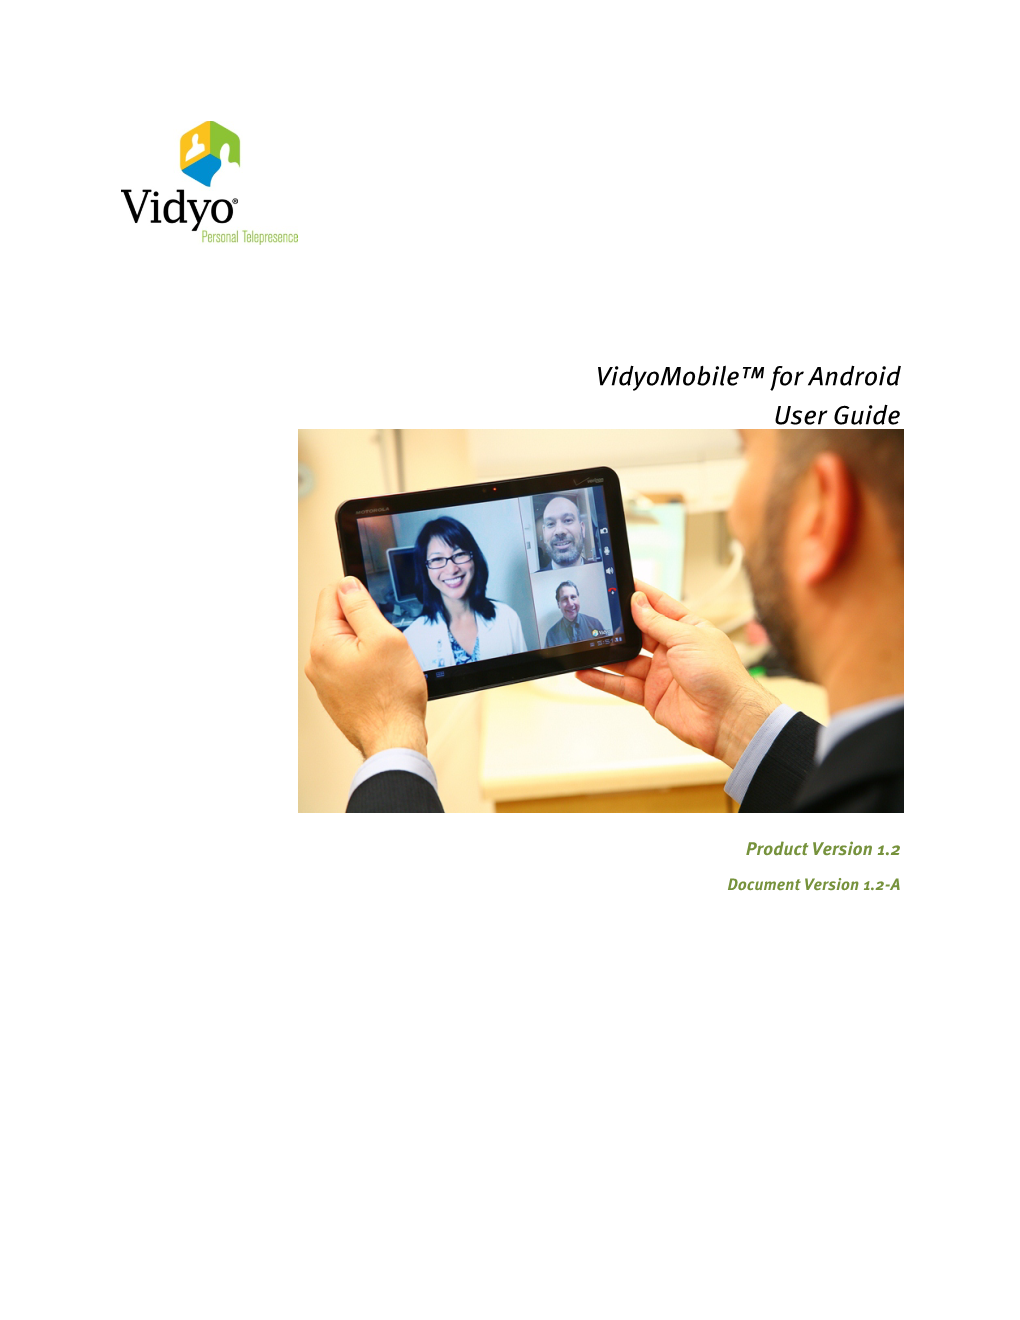 Vidyomobile for Android User Guide, Version 1.2-A